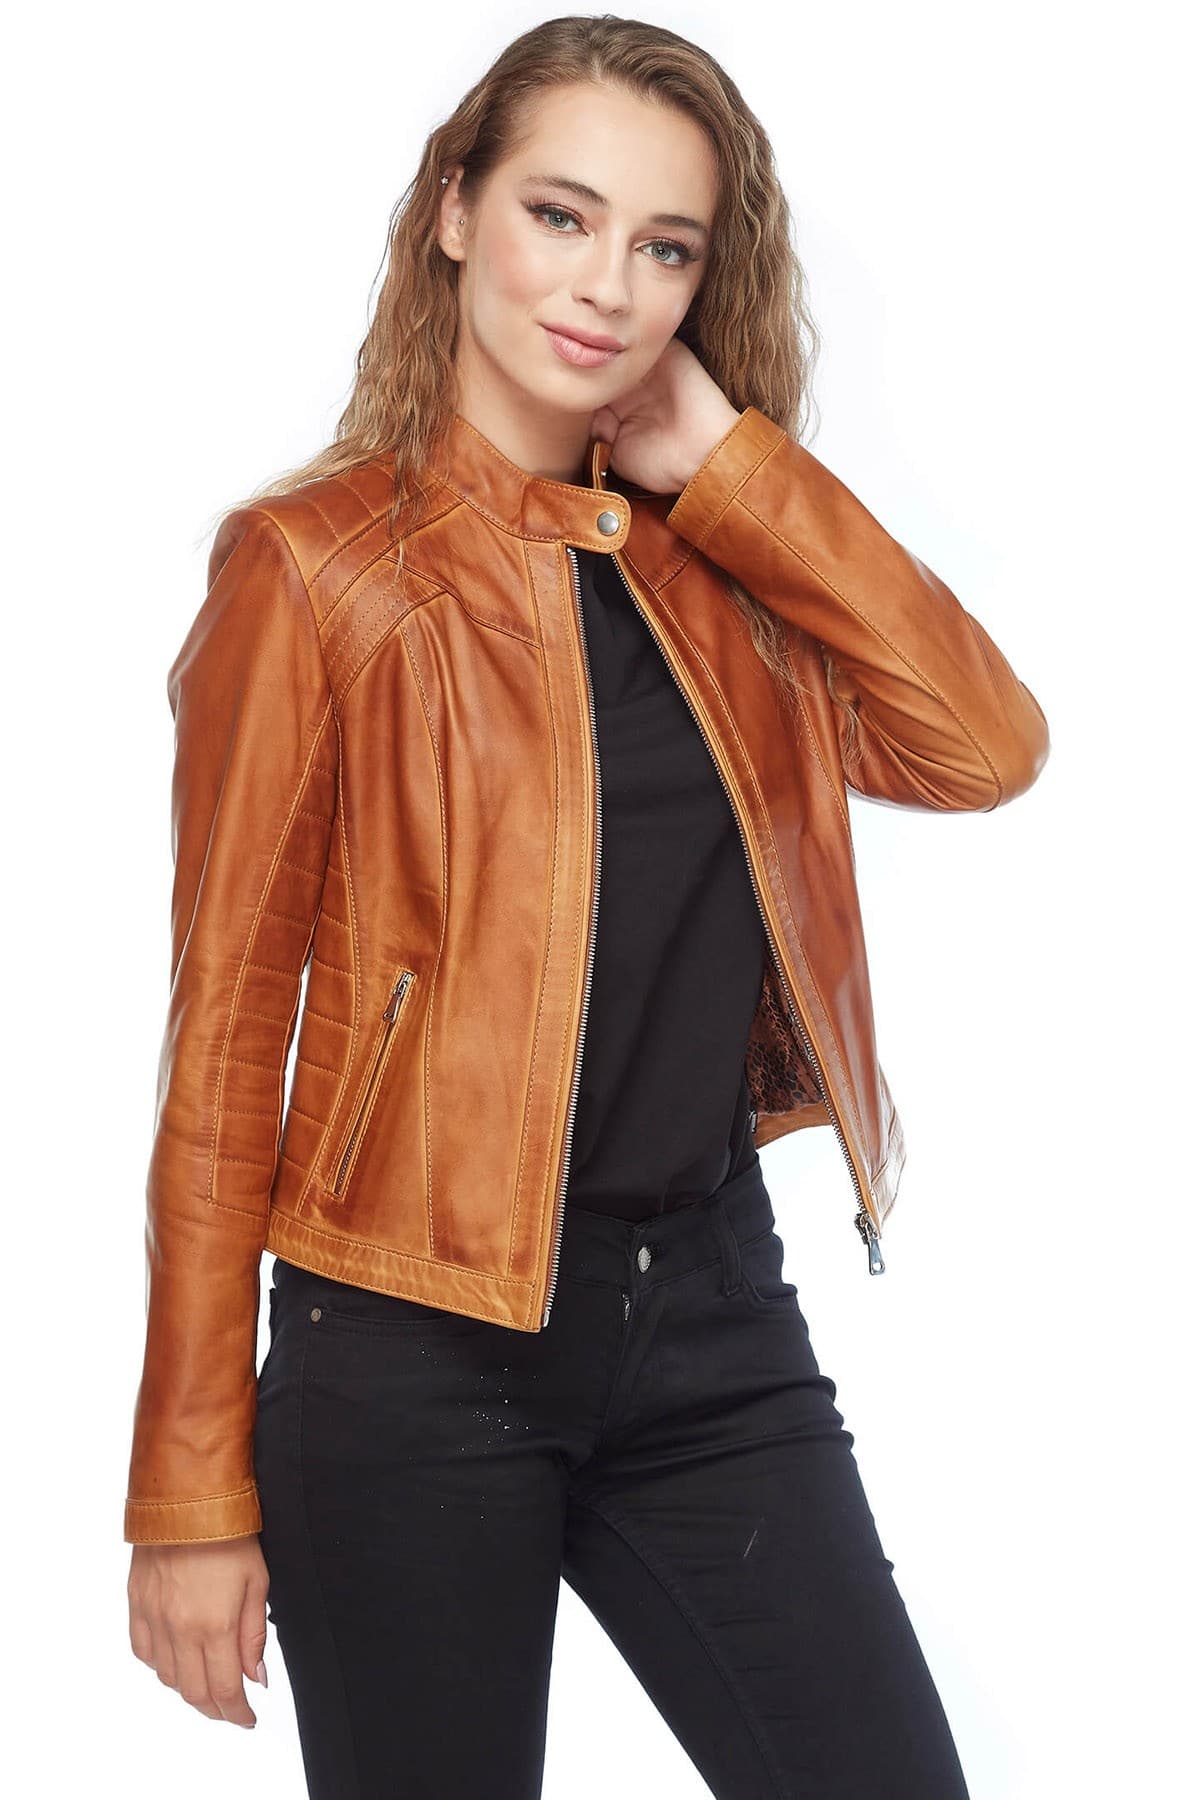 Millie Brady Women's 100 % Real Brown Leather Waxed Jacket